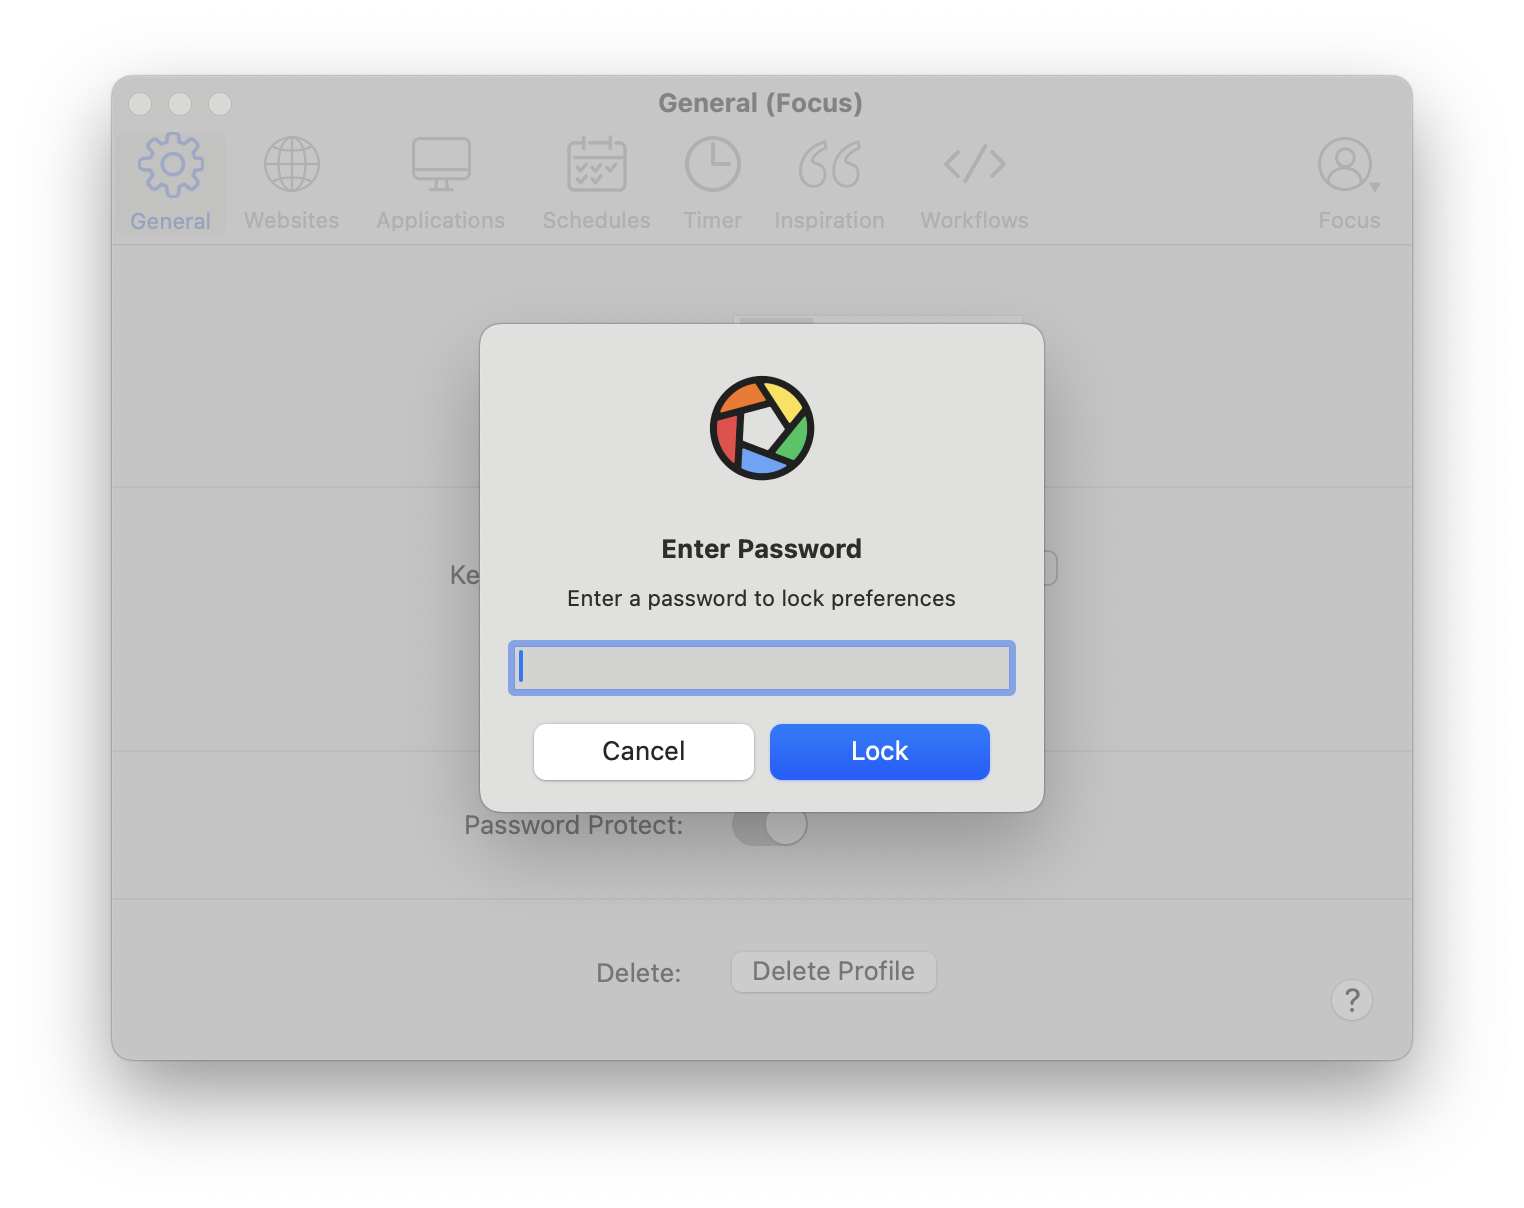 Focus enables you to lock any profile, preventing further changes without the password.